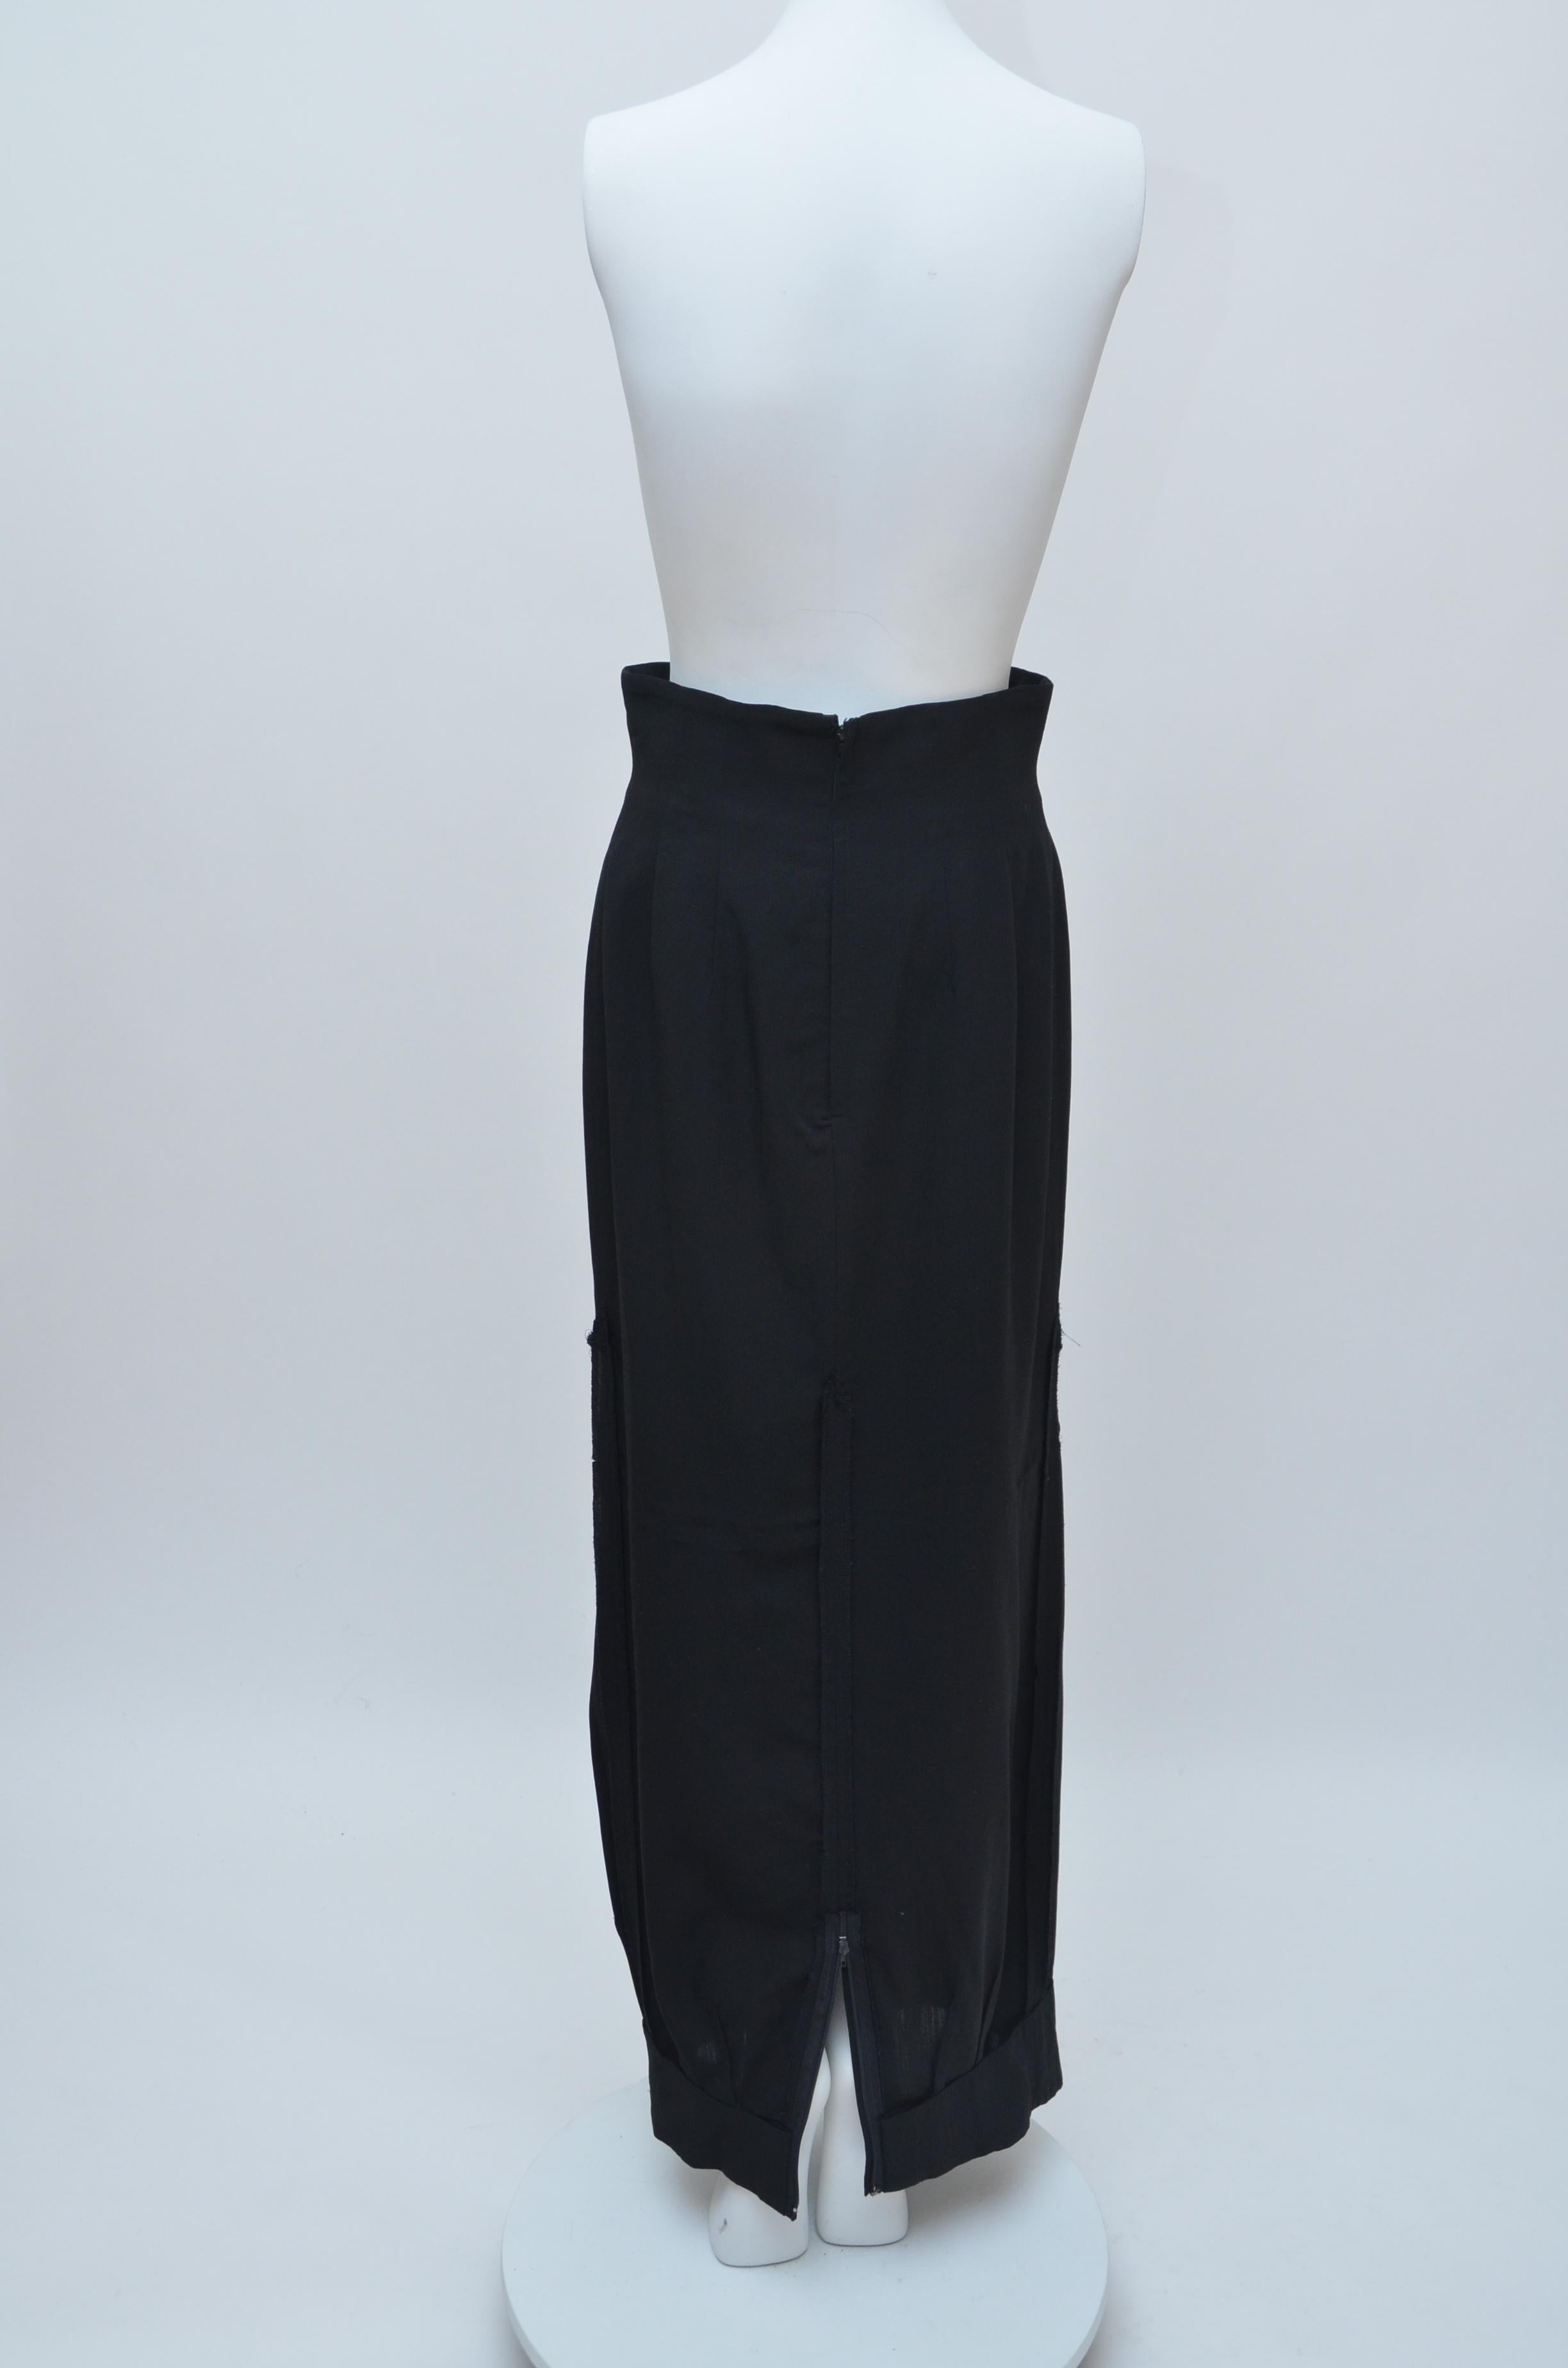 Rare Comme Des Garçons AD 1990 Upside Down Long Black Skirt   In Excellent Condition For Sale In New York, NY